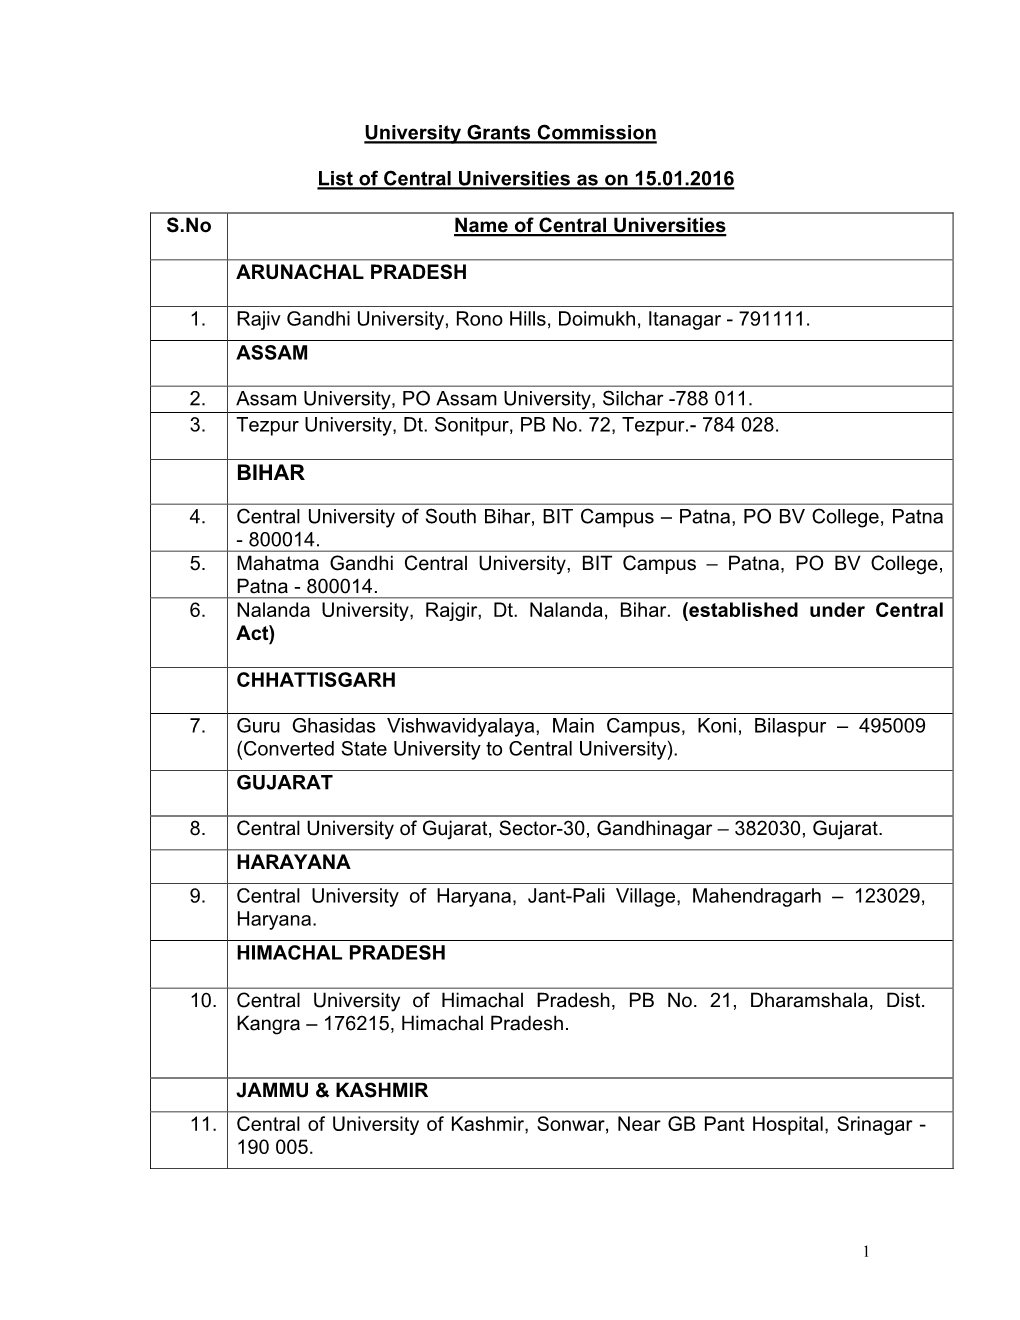 Consolidated List of Central Universities